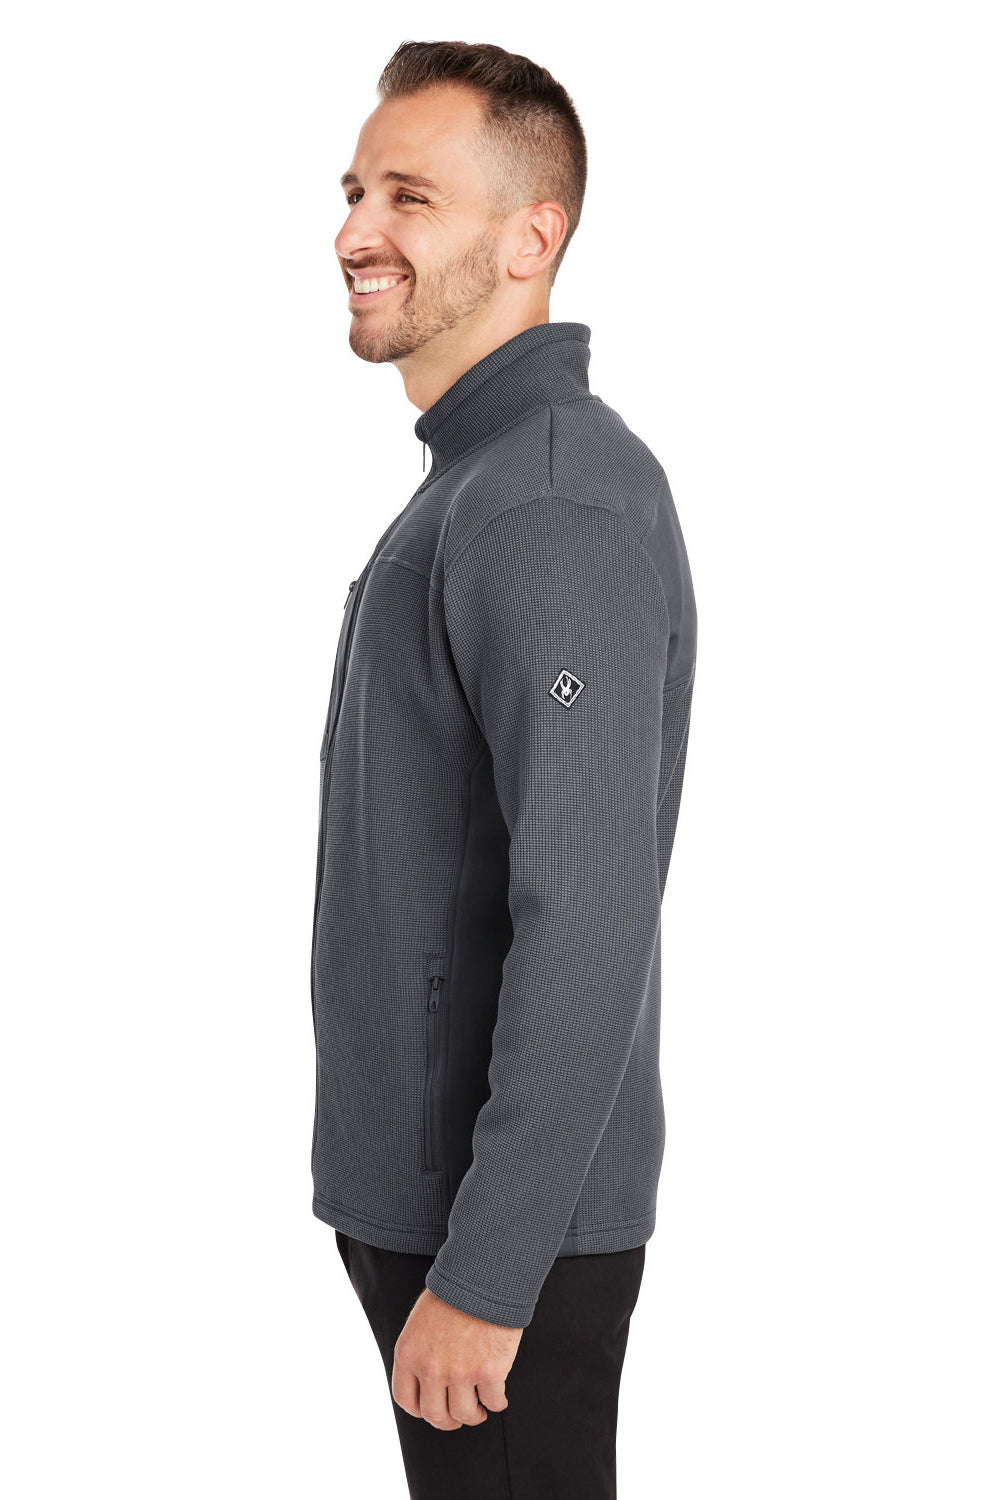 Spyder S17936 Mens Constant Canyon Full Zip Sweater Jacket Polar Grey Side